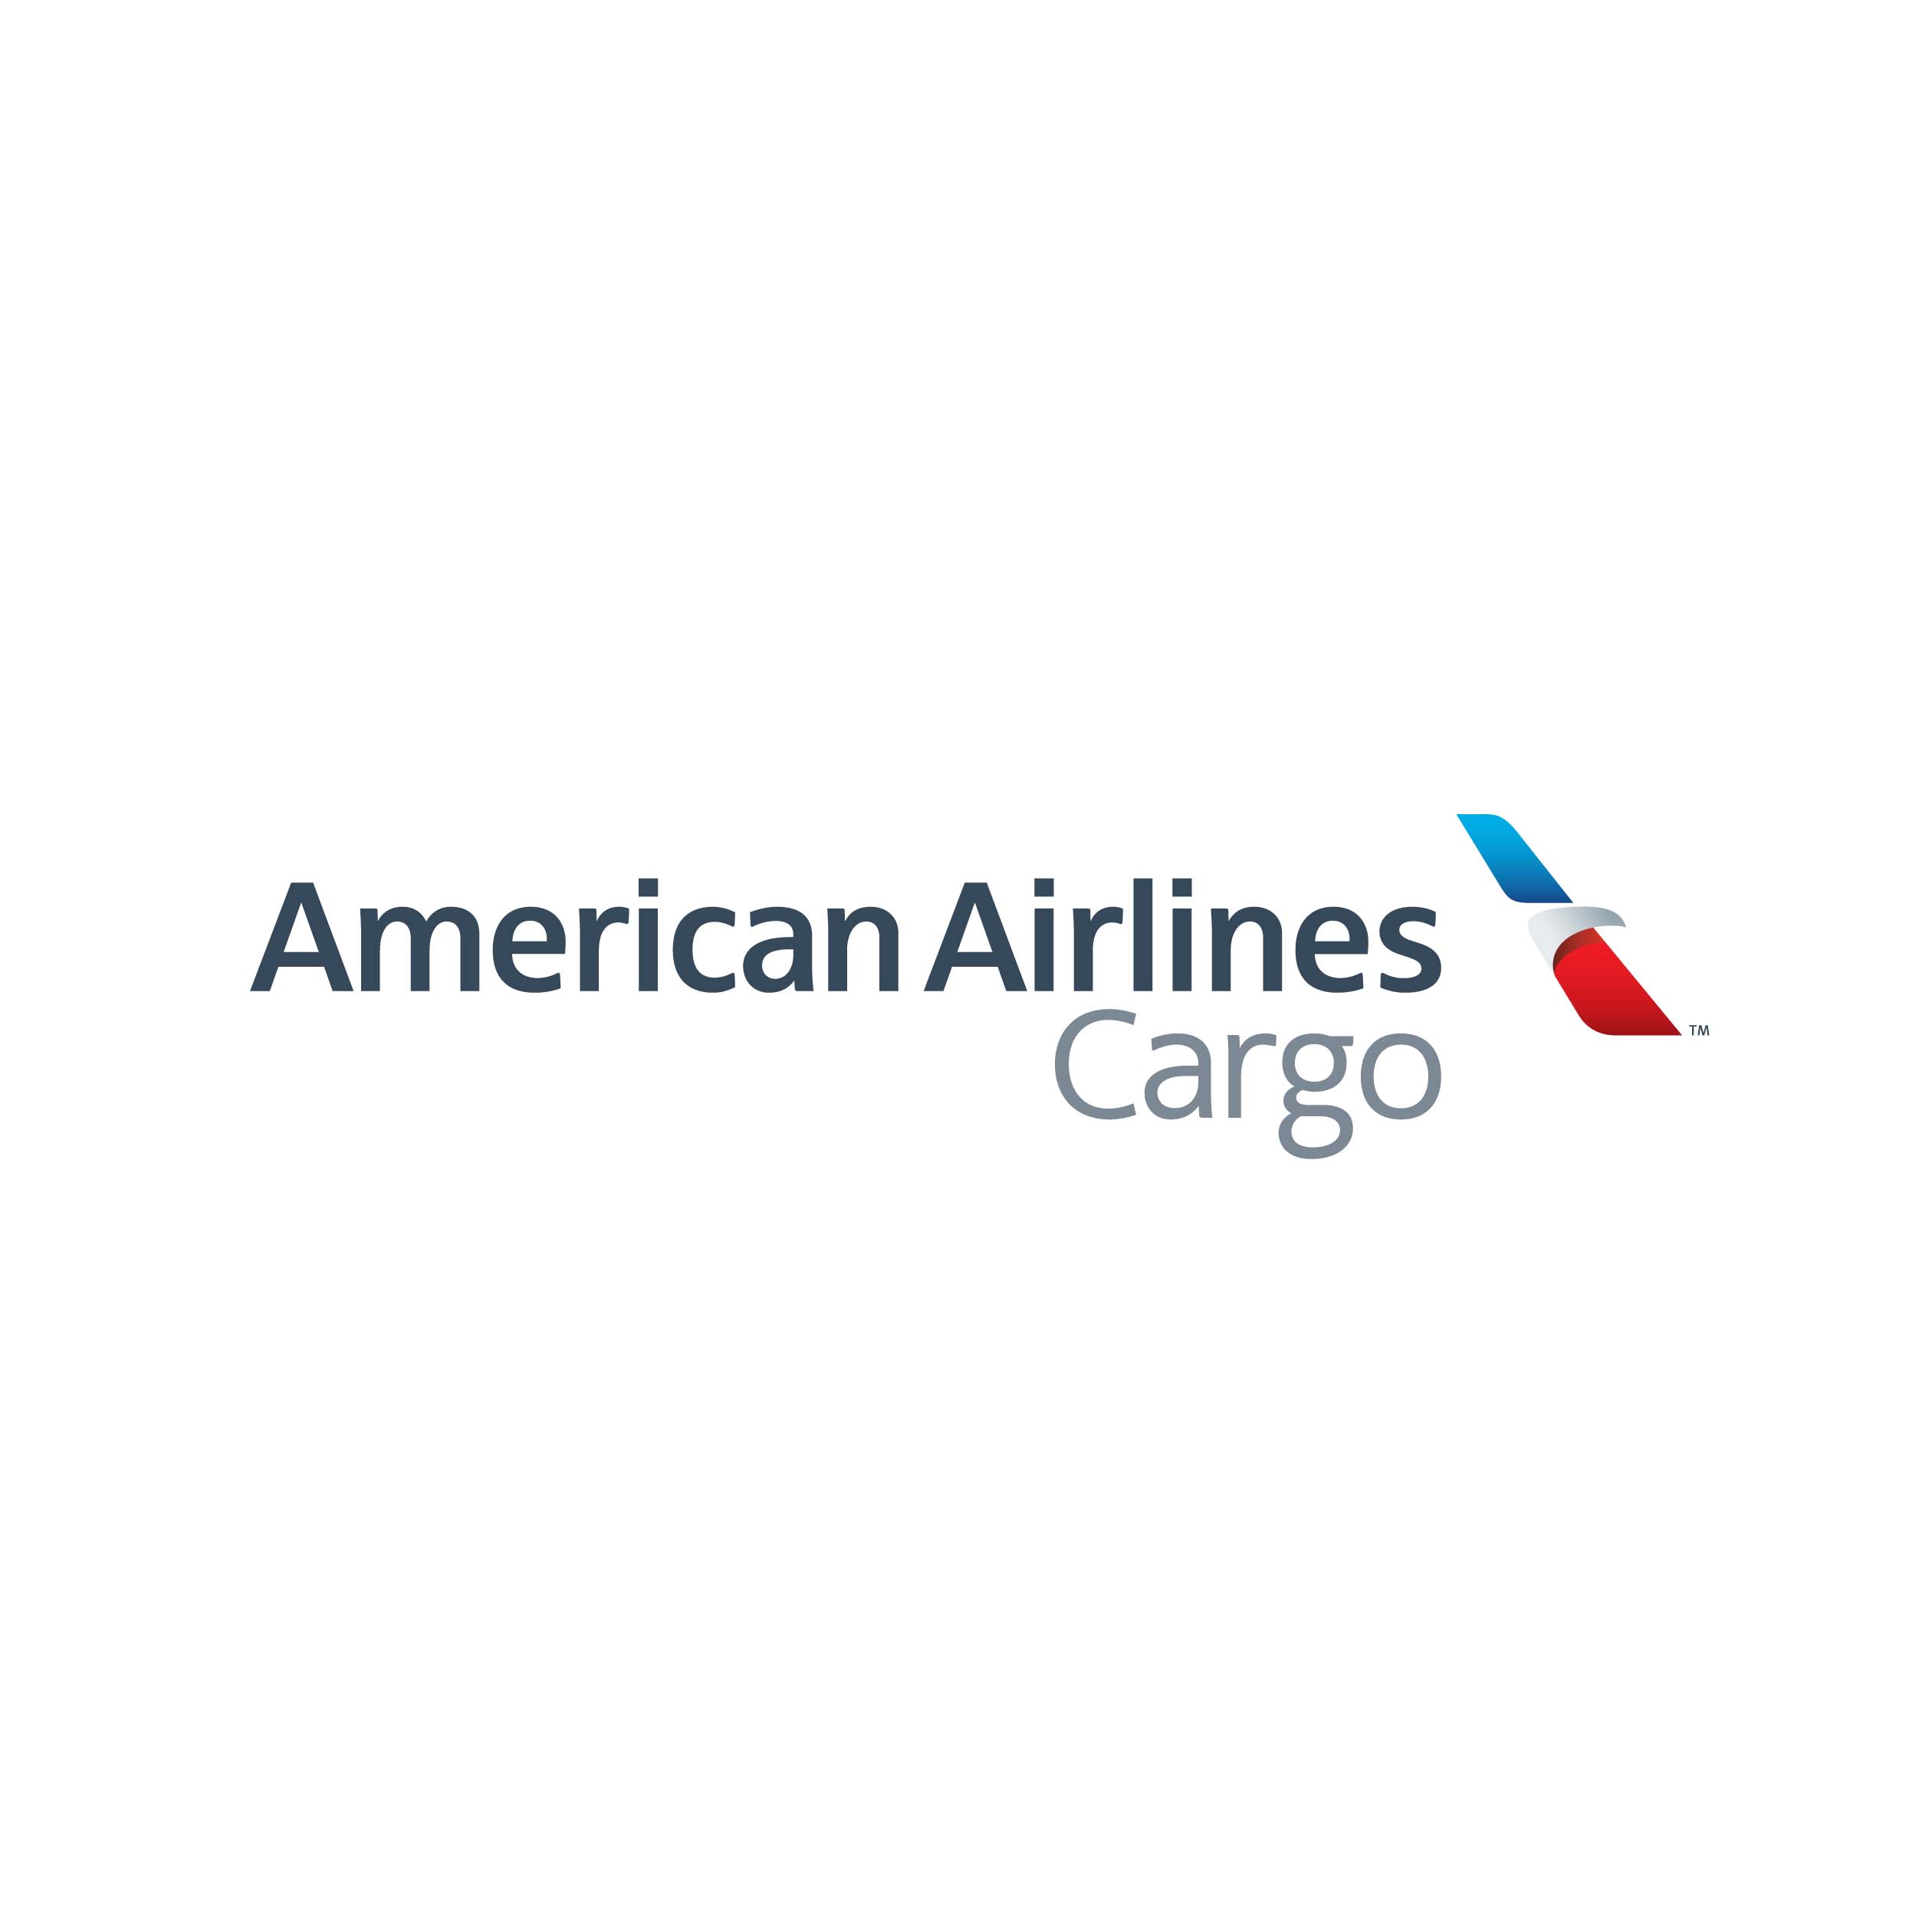 American Airlines renews for CHAMP’s TRAXON cargoHUB service